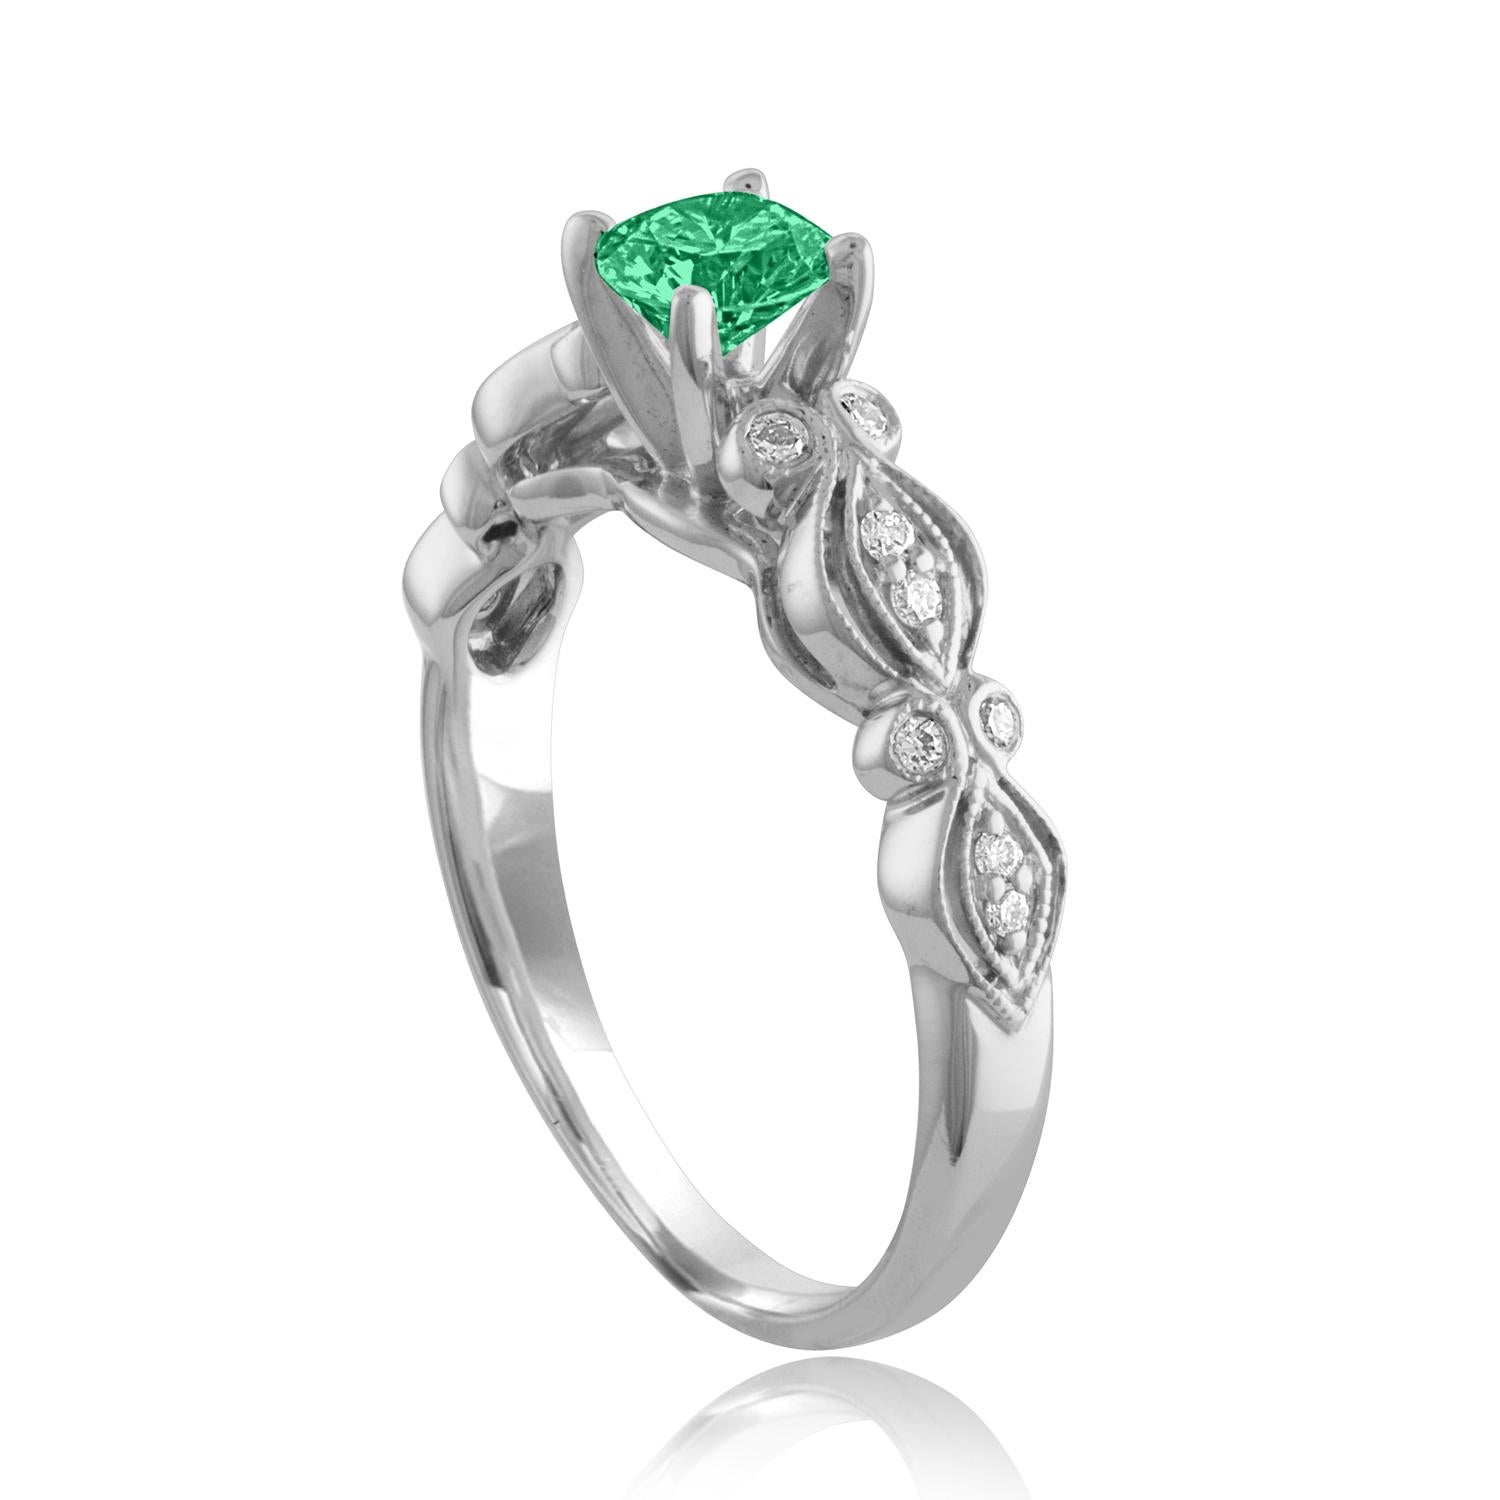 Beautiful Diamond & Emerald Milgrain Ring
The ring is 18K White Gold.
There are 0.13 Carats in Diamonds F/G VS/SI
The Center is Round 0.35 Carat Emerald.
The Emerald is AGL certified.
The ring is a size 6.75, sizable.
The ring weighs 3.6 grams.